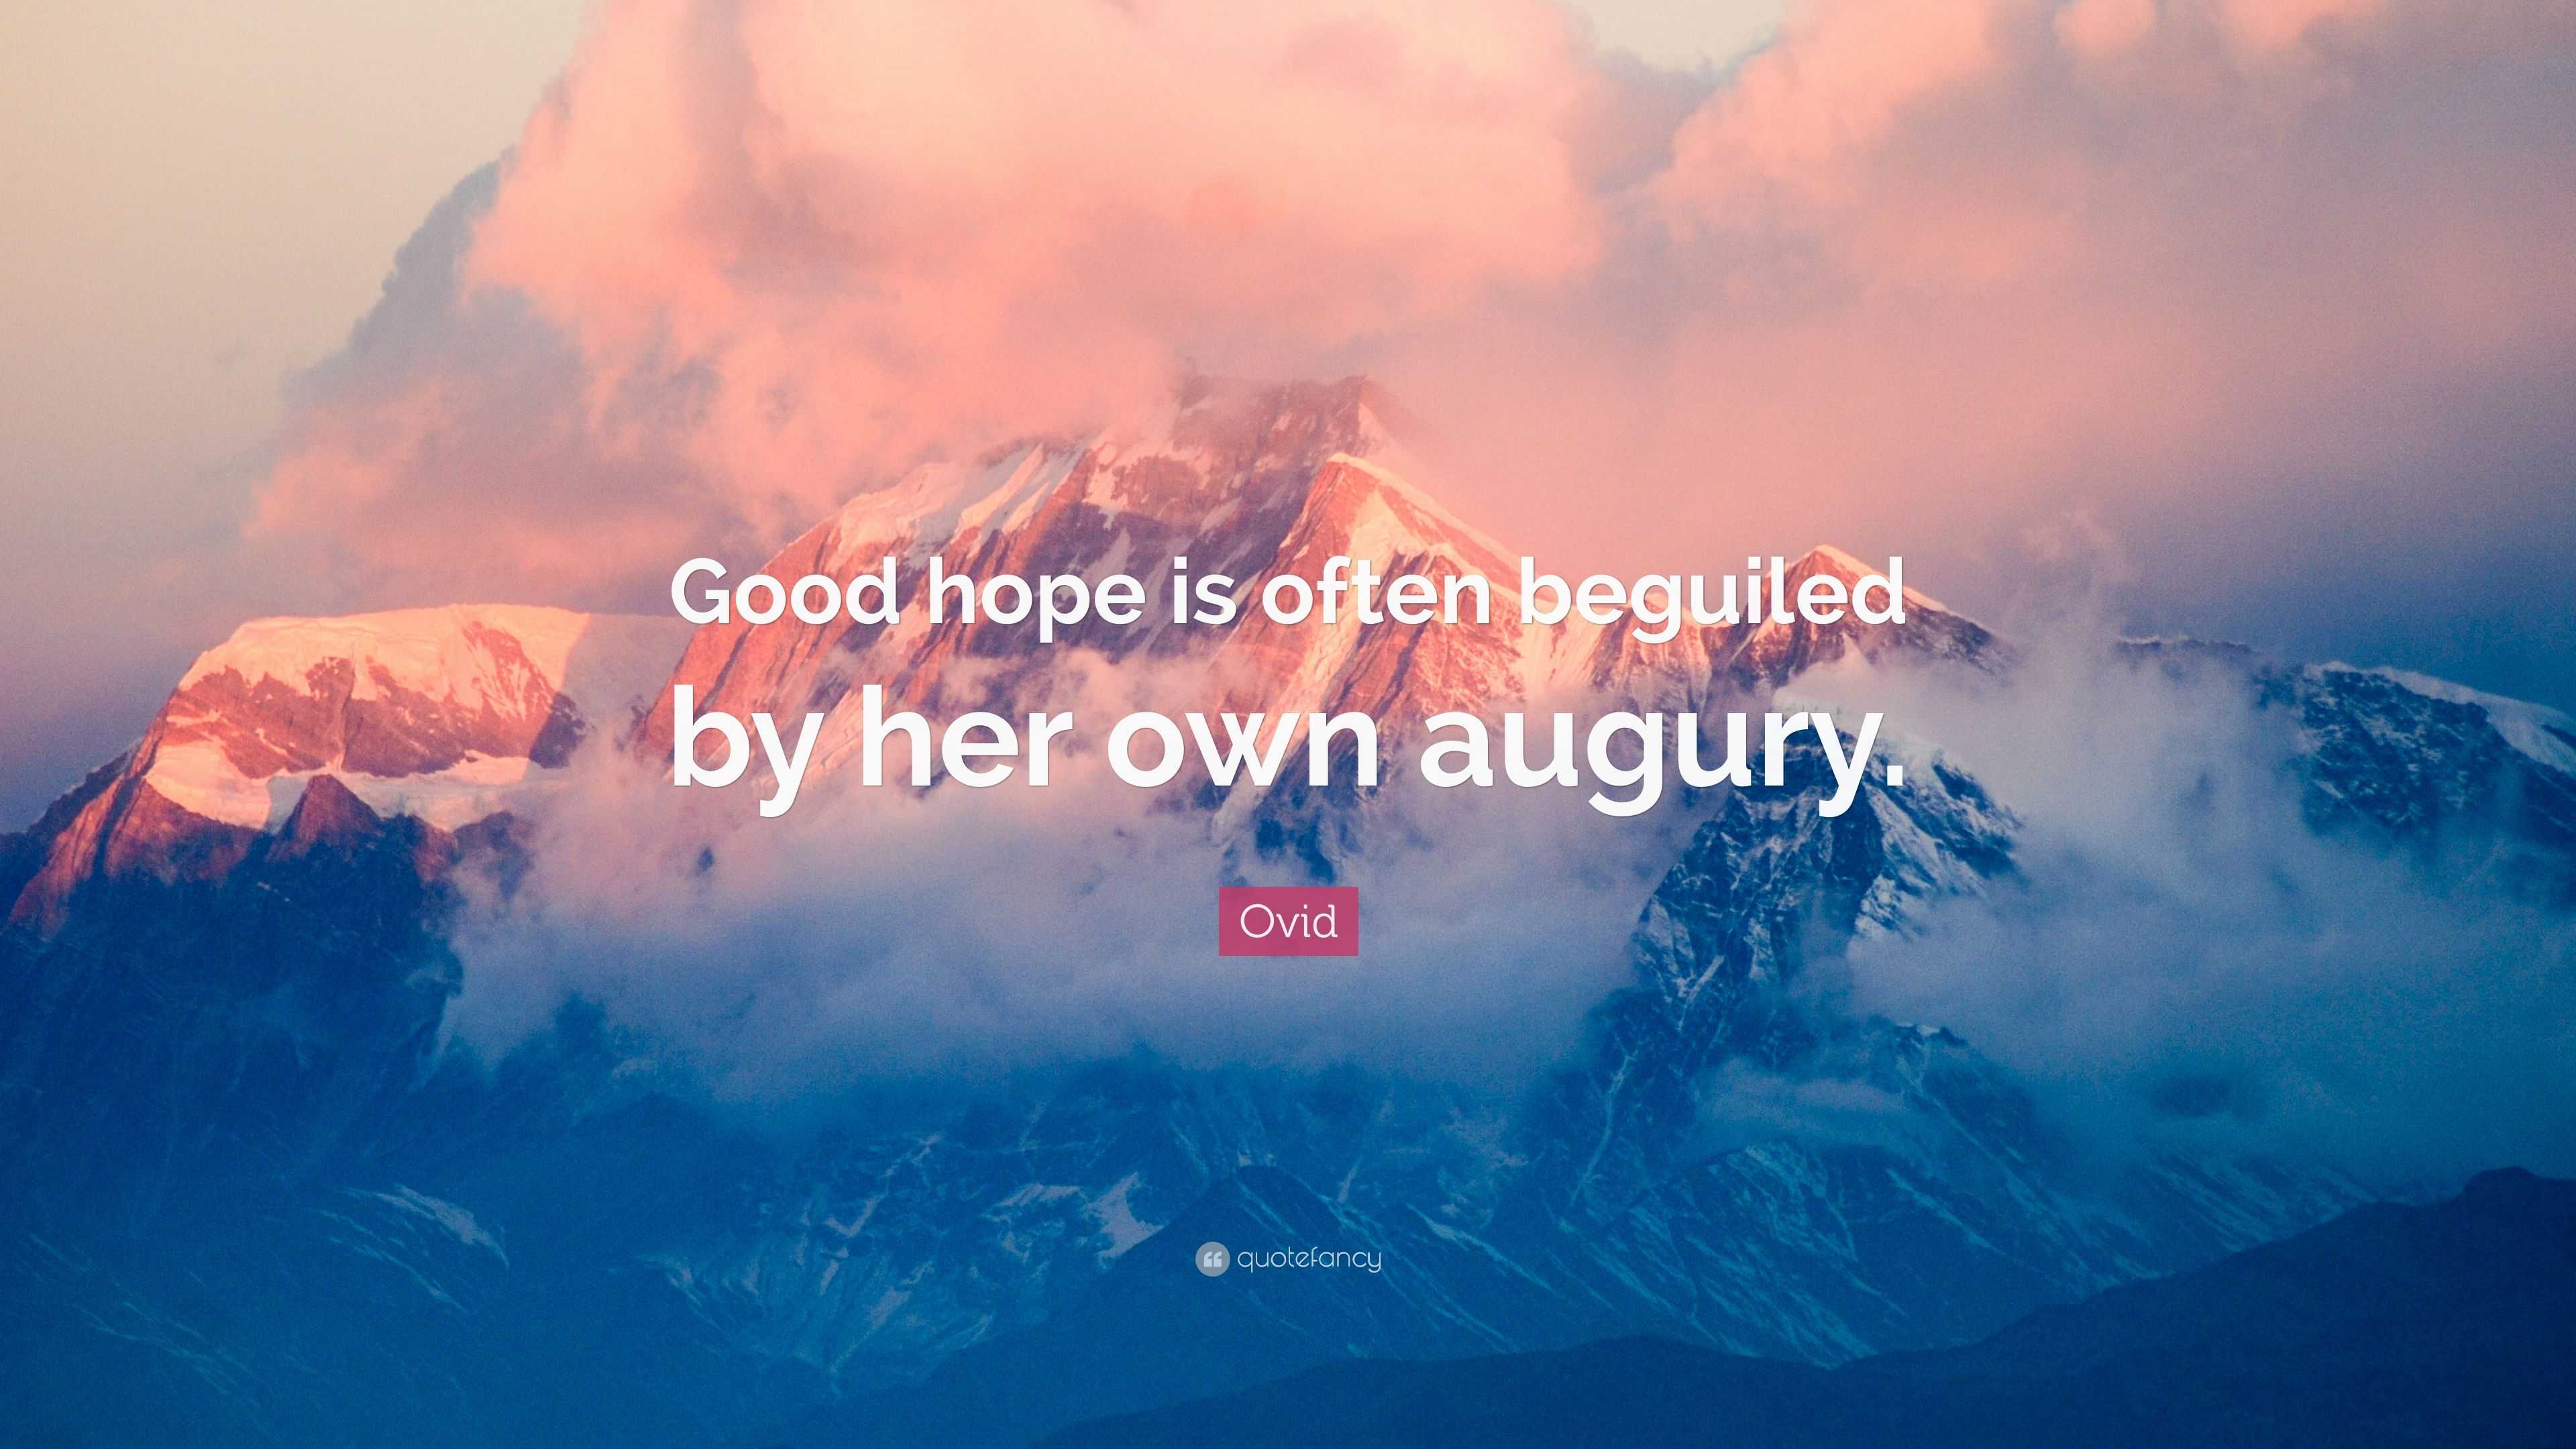 Ovid Quote: “Good hope is often beguiled by her own augury.”